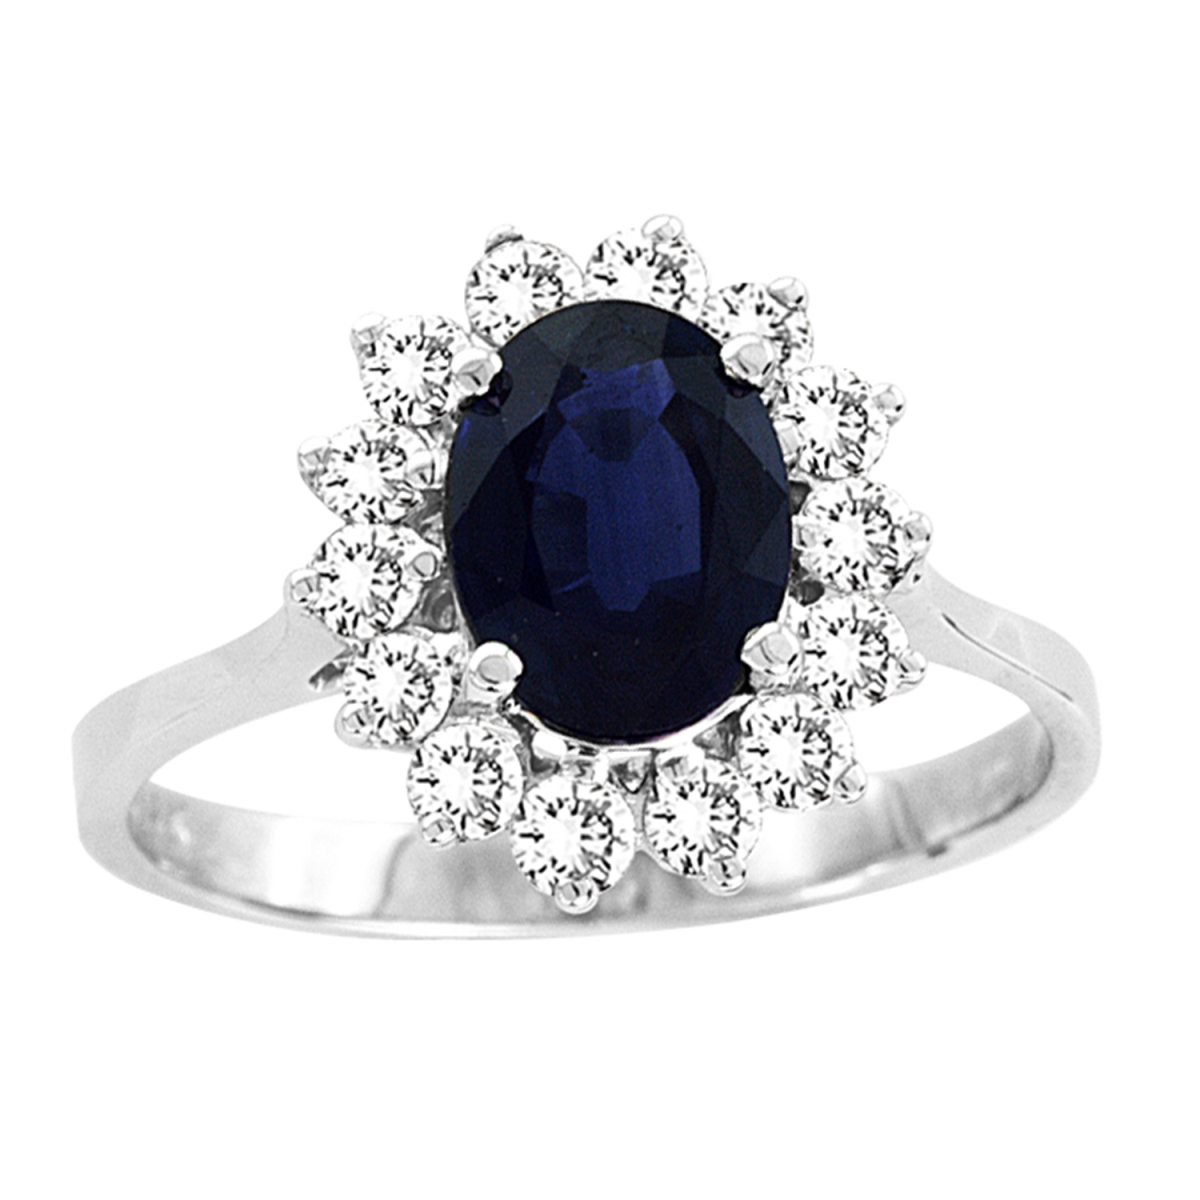 Picture of Louis Creations R1548SD-9 14K Gold Royal Collection 1.75 CTTW 8 x 6 mm 1.35 Carat Oval Sapphire Center Stone Natural Sapphire & Diamond Ring - Size 9